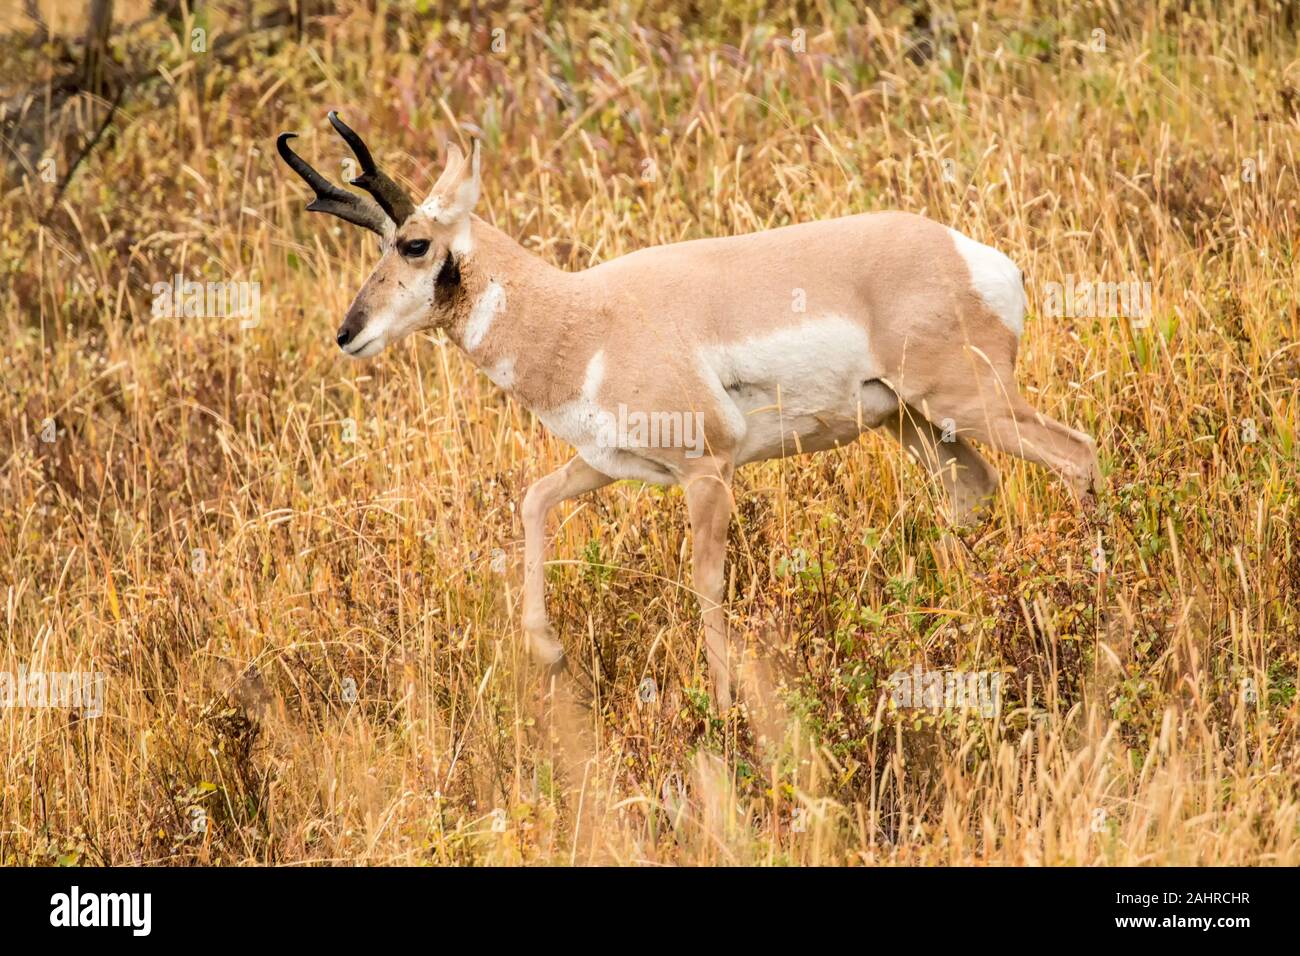 Yellowstone National Park, Wyoming, USA. Adult male Pronghorn antelope walking in tall grass. Stock Photo